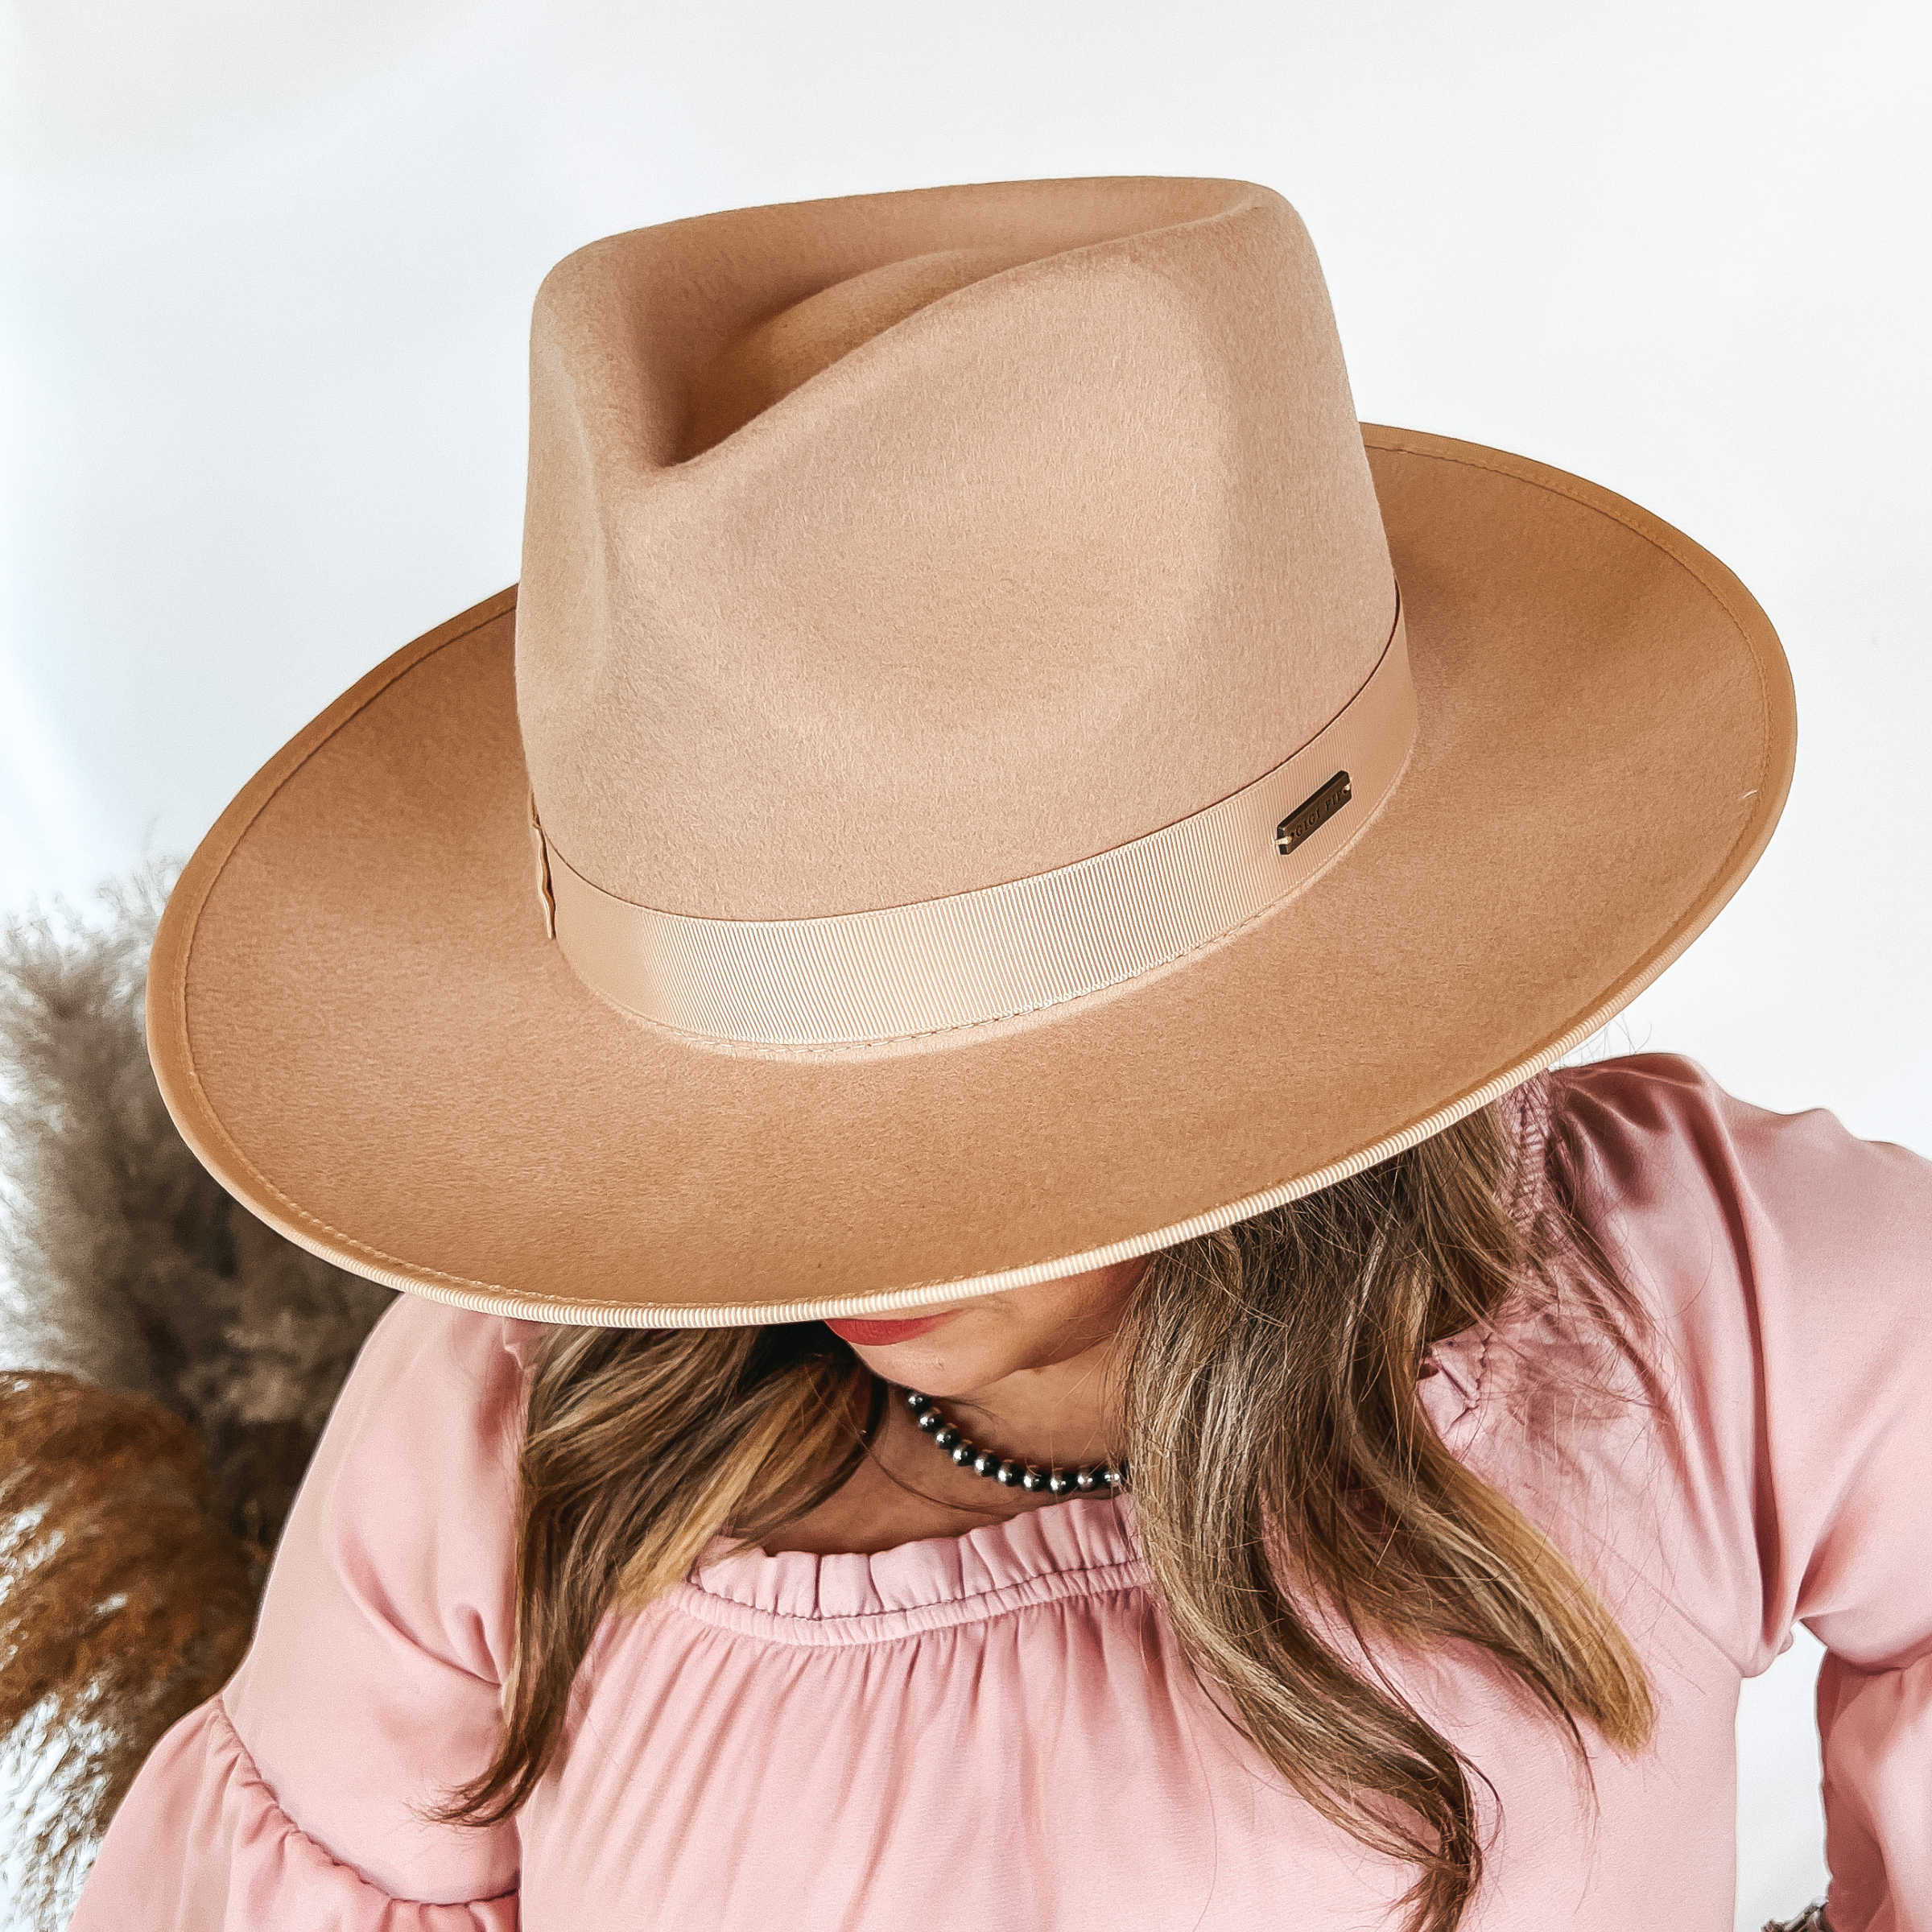 Model is wearing a beige rancher hat with a curved brim.